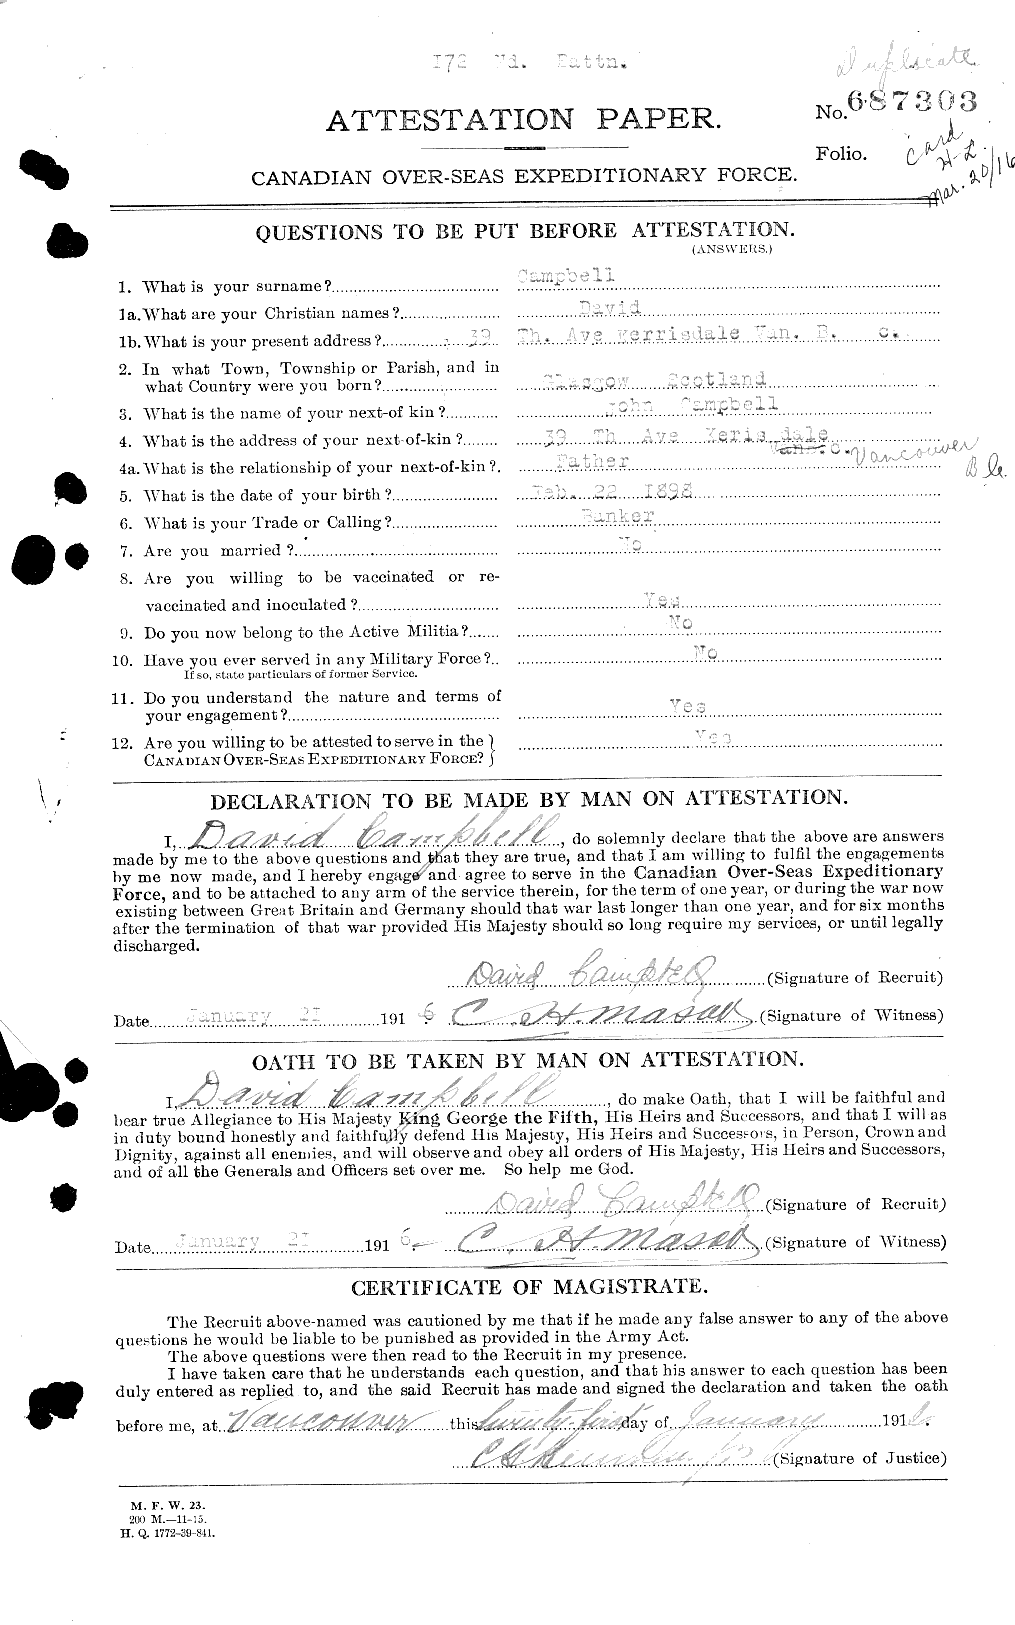 Personnel Records of the First World War - CEF 003529a